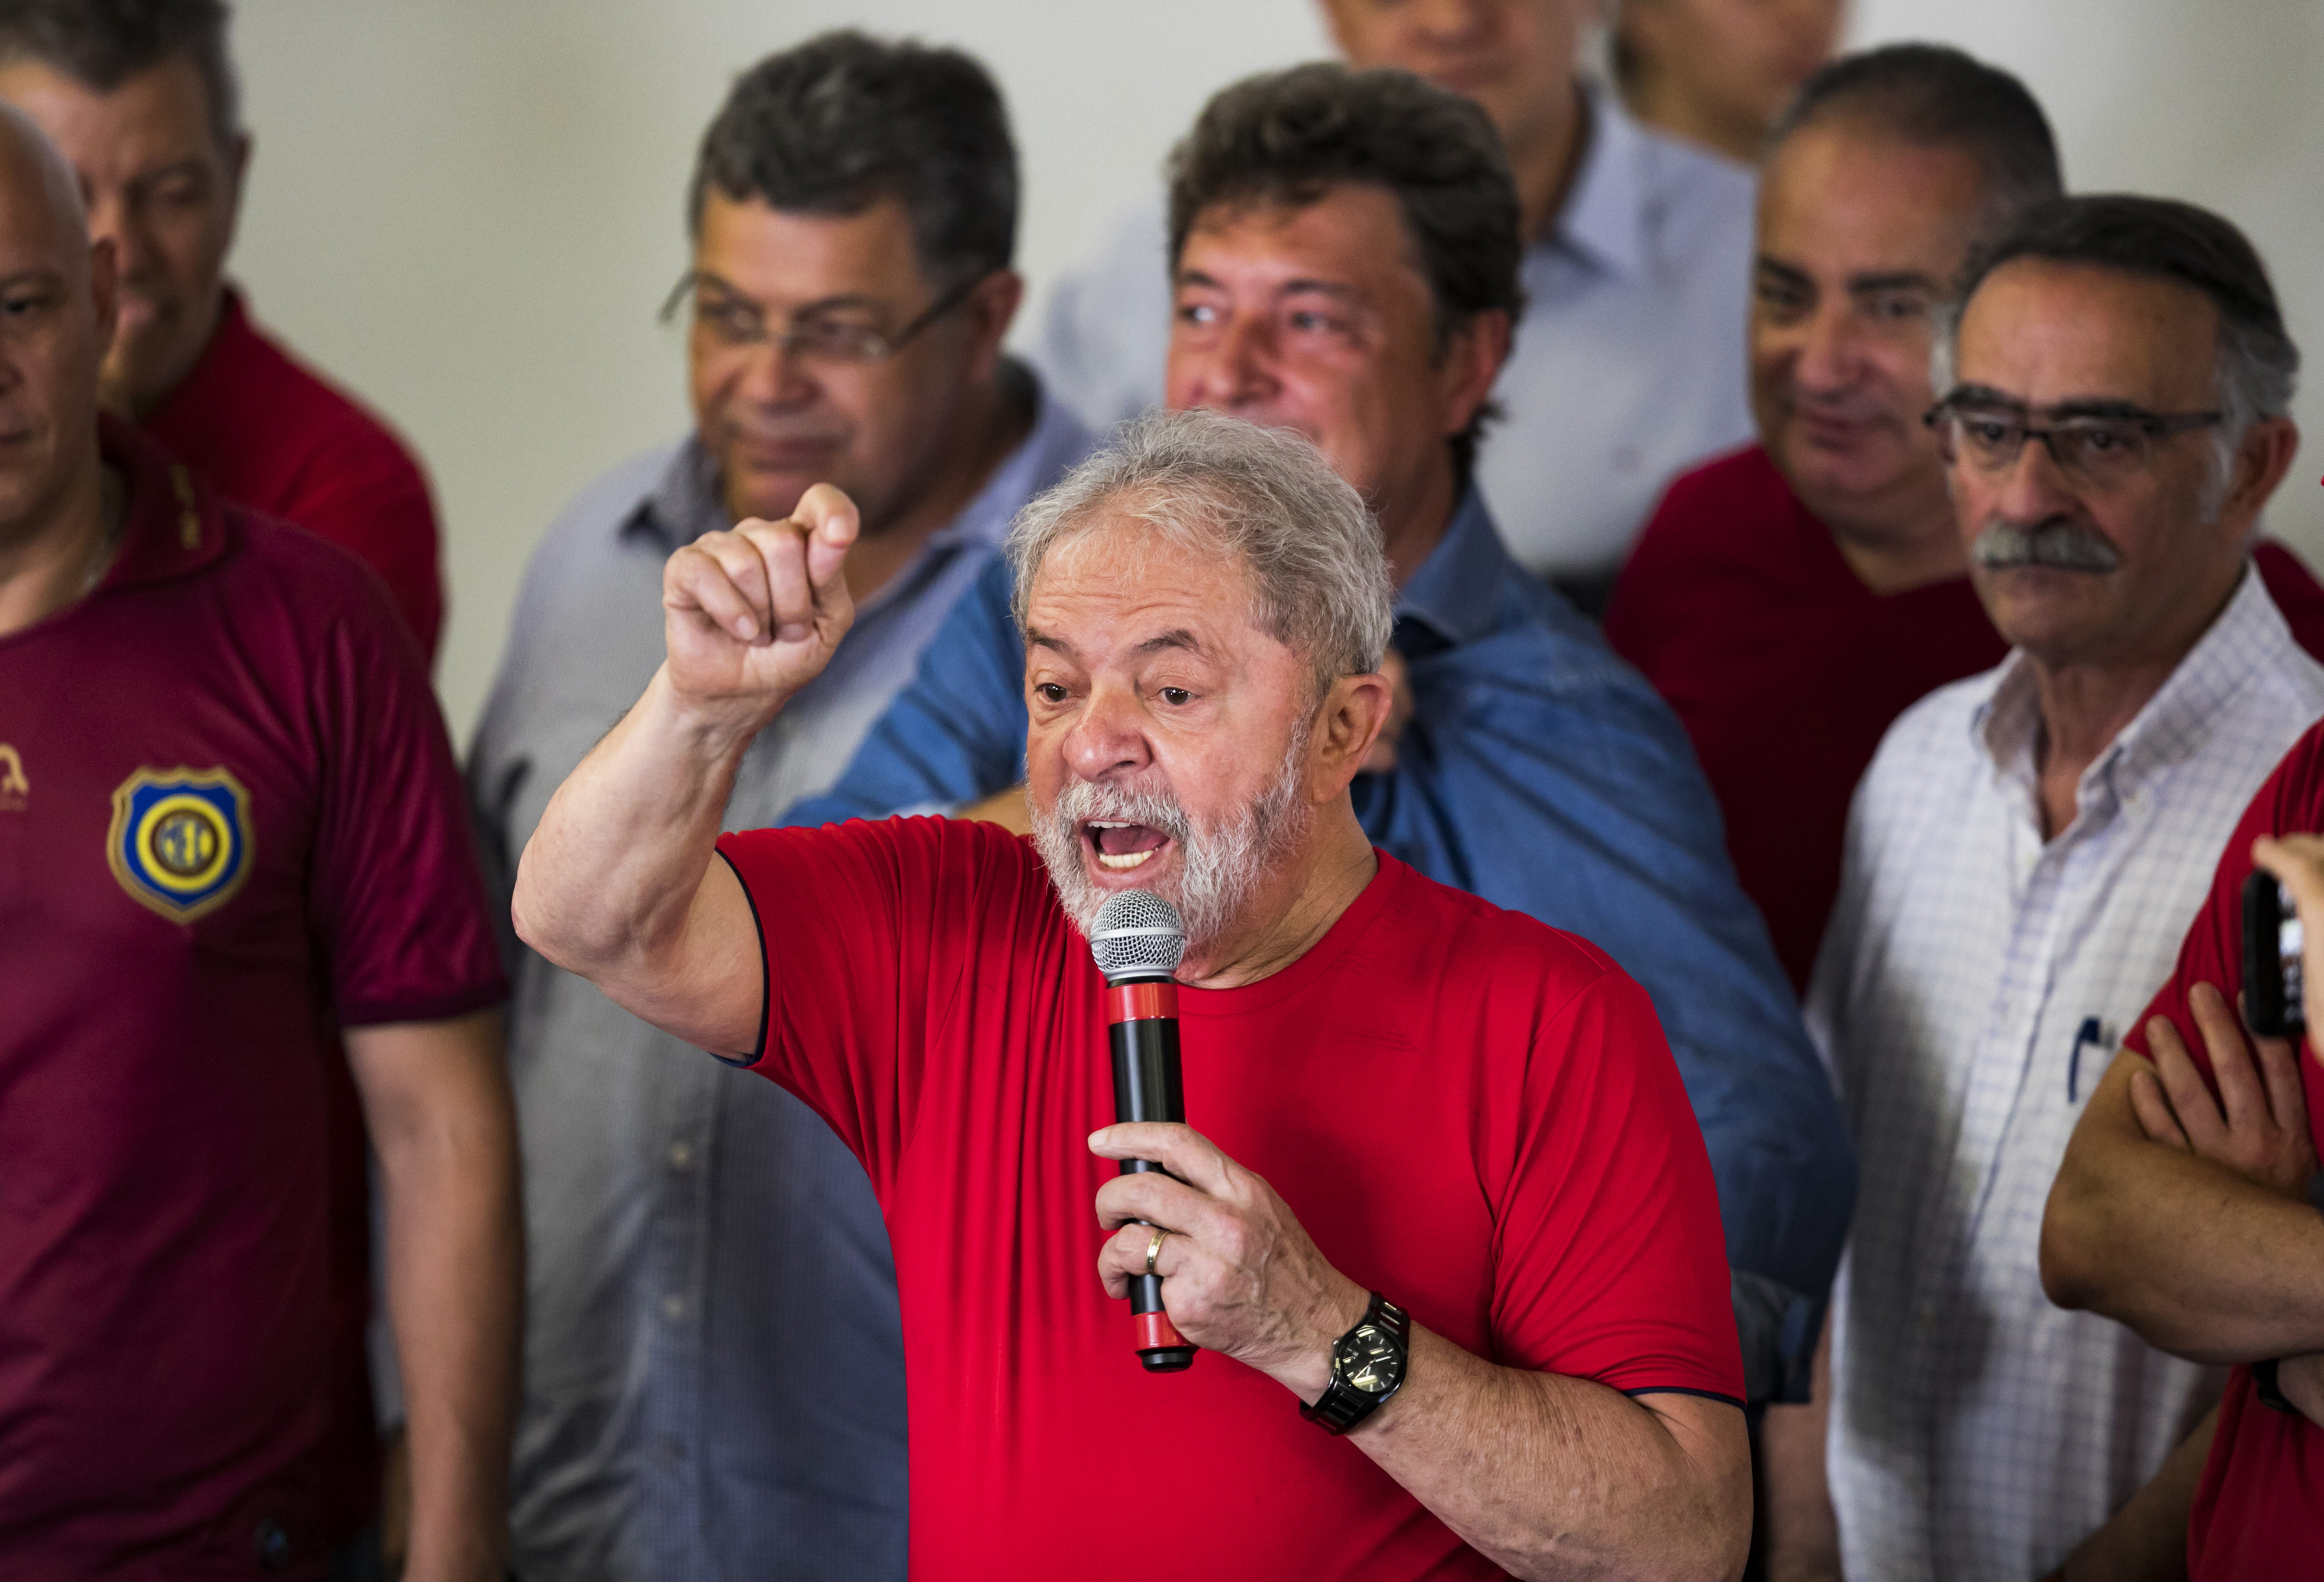 Former President Luiz Inacio Lula da Silva speaks supporters during a visit to the metallurgic syndicate headquarters in Sao Bernardo do Campo, Brazil, Wednesday, Jan. 24, 2018. An appellate court in Brazil is considering whether to uphold or throw out a corruption conviction against da Silva, a decision that could impact whether the former leader can run for president. The 72-year-old leads preference polls for October’s race. (AP Photo/Marcelo Chello)